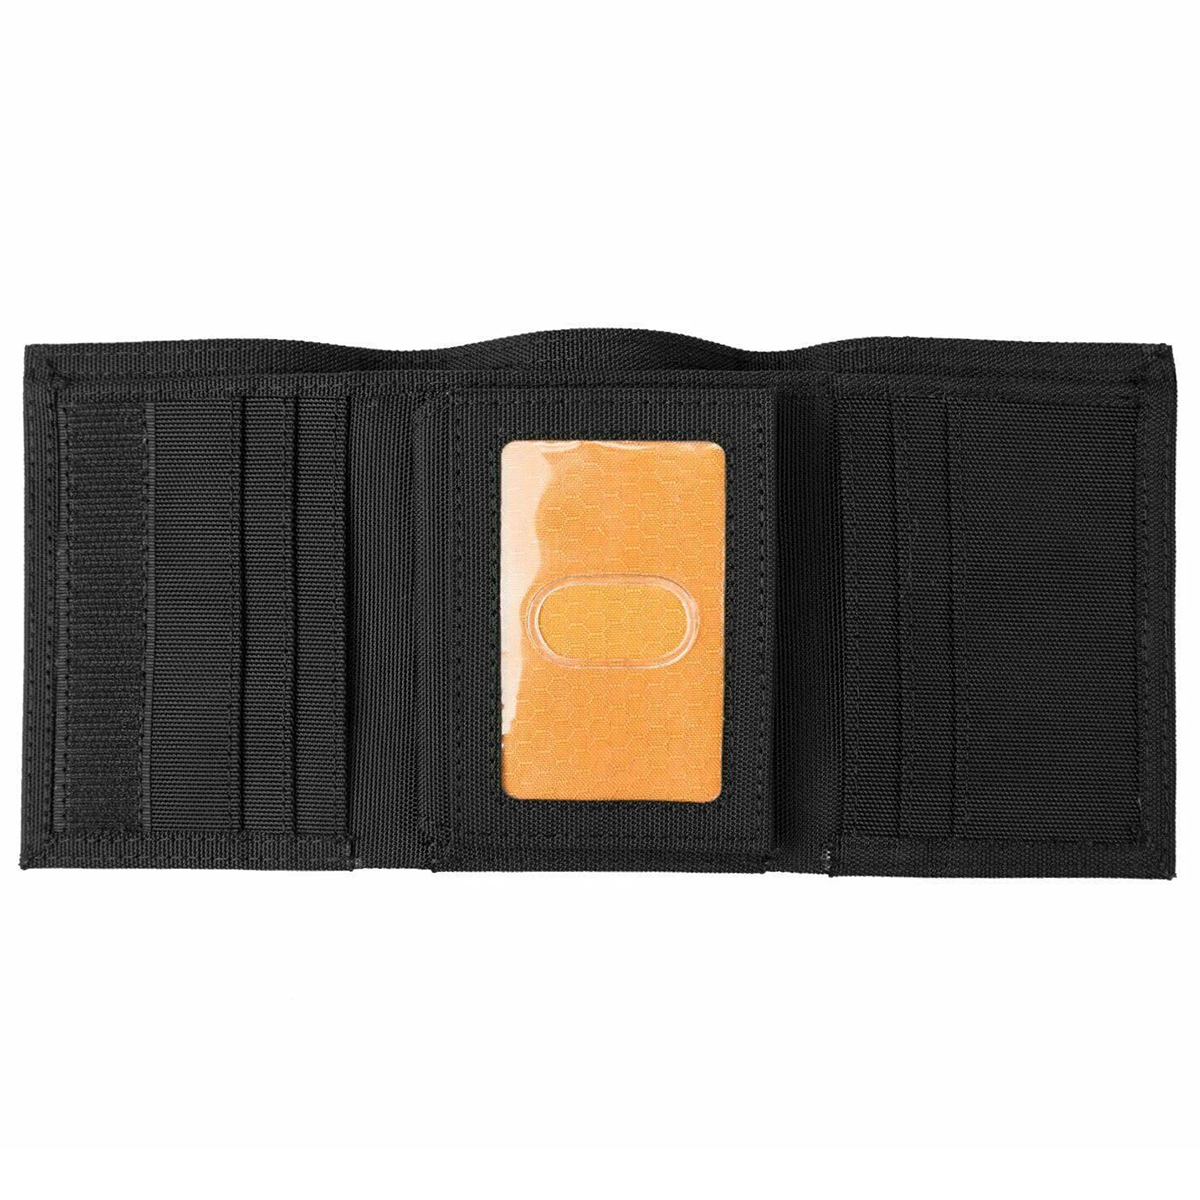  Timberland PRO Men's Cordura Nylon RFID Trifold Wallet with ID  Window, Orange, One Size : Clothing, Shoes & Jewelry